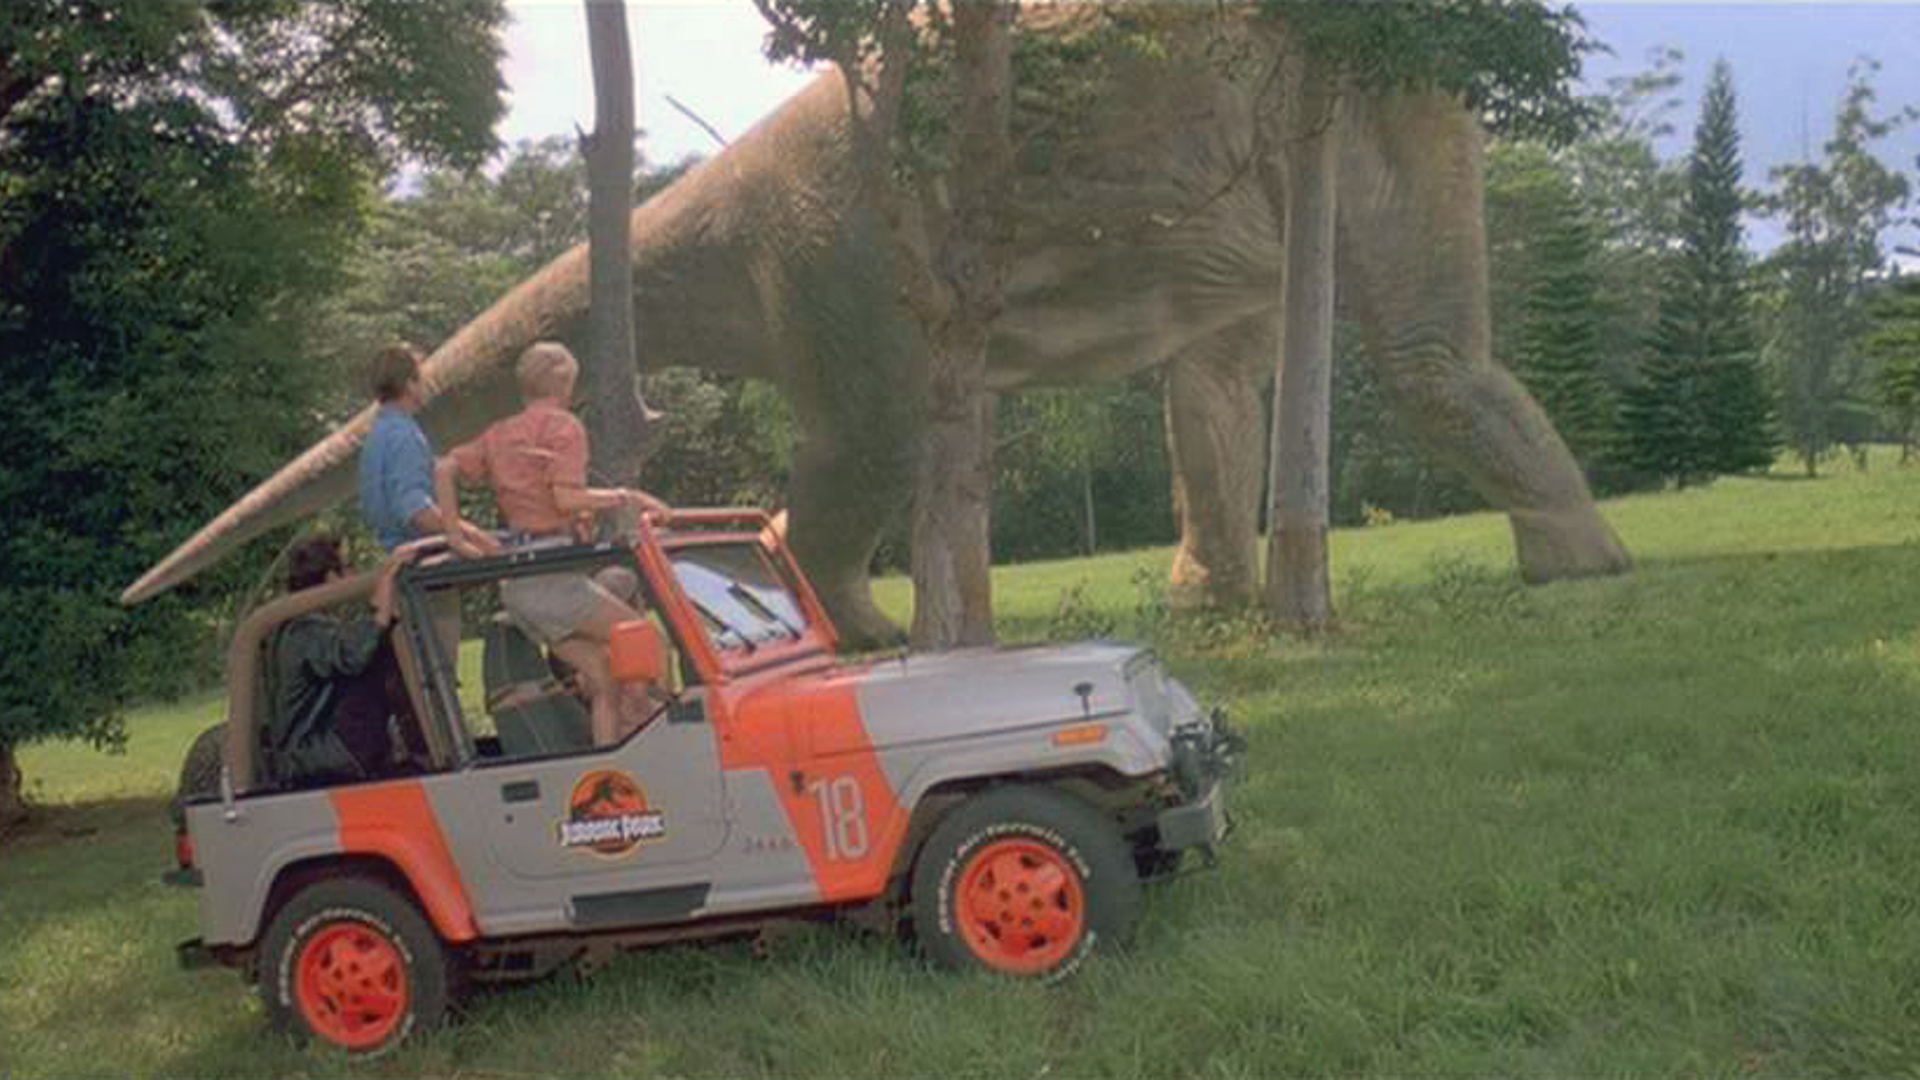 Few scenes from Spielberg’s dino classic are as memorable, few baddie deaths come as perfectly executed as rogue security programmer Dennis Nedry’s death by blinding, then mauling at the claws of the at once cute, at once deadly Dilophosaurus. The car he’s in at the time? The venerable Jeep TJ, complete with winch kit, spotlights, bright red wheels and Jurassic Park branding. It wasn’t enough to get poor Mr. Nedry to the dock, but it will stick in the minds of <i>Jurassic</i> enthusiasts for a long time.